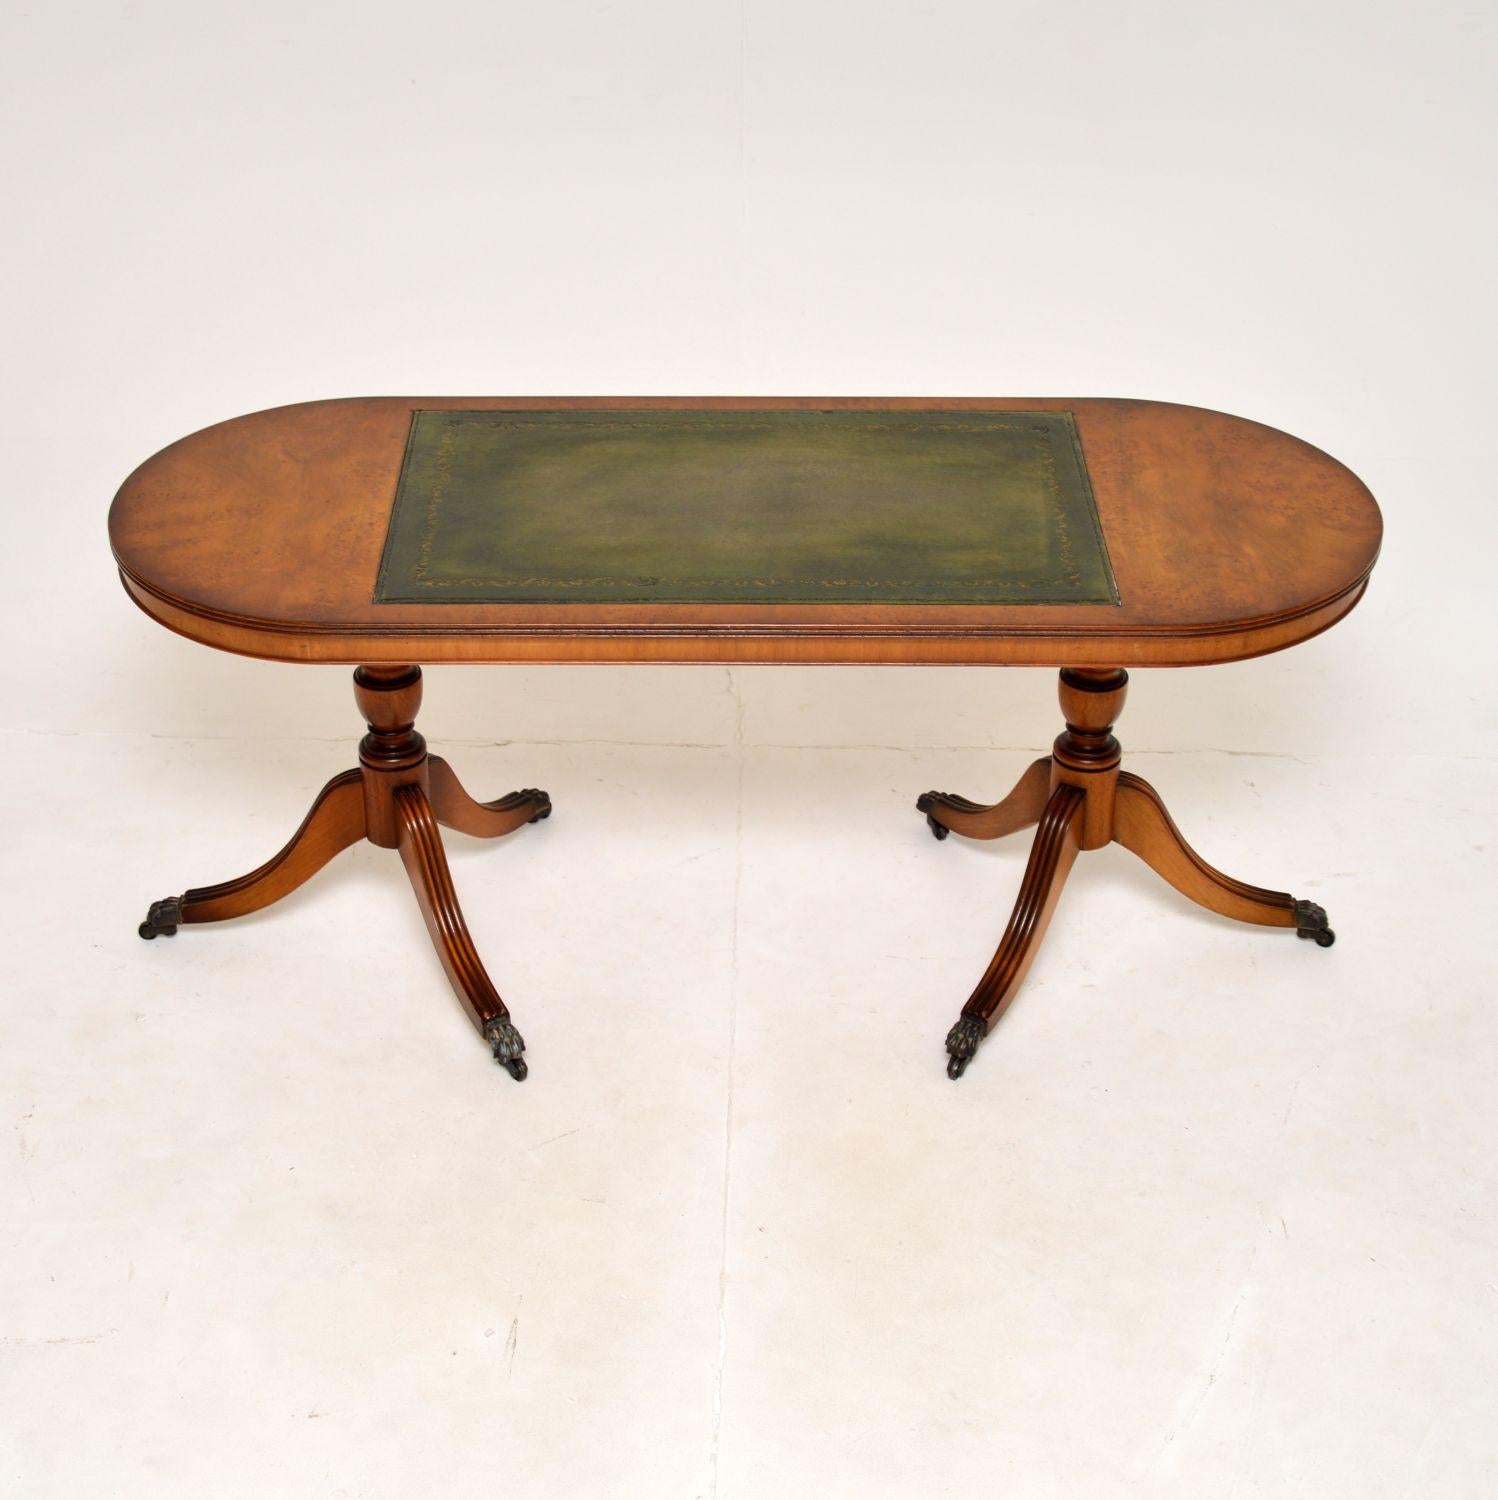 A beautiful and very well made antique Regency style walnut and leather coffee table. This was made in England, it dates from around the 1930’s.

This is of superb quality and is a very useful size. The oval shaped top has stunning burr walnut grain